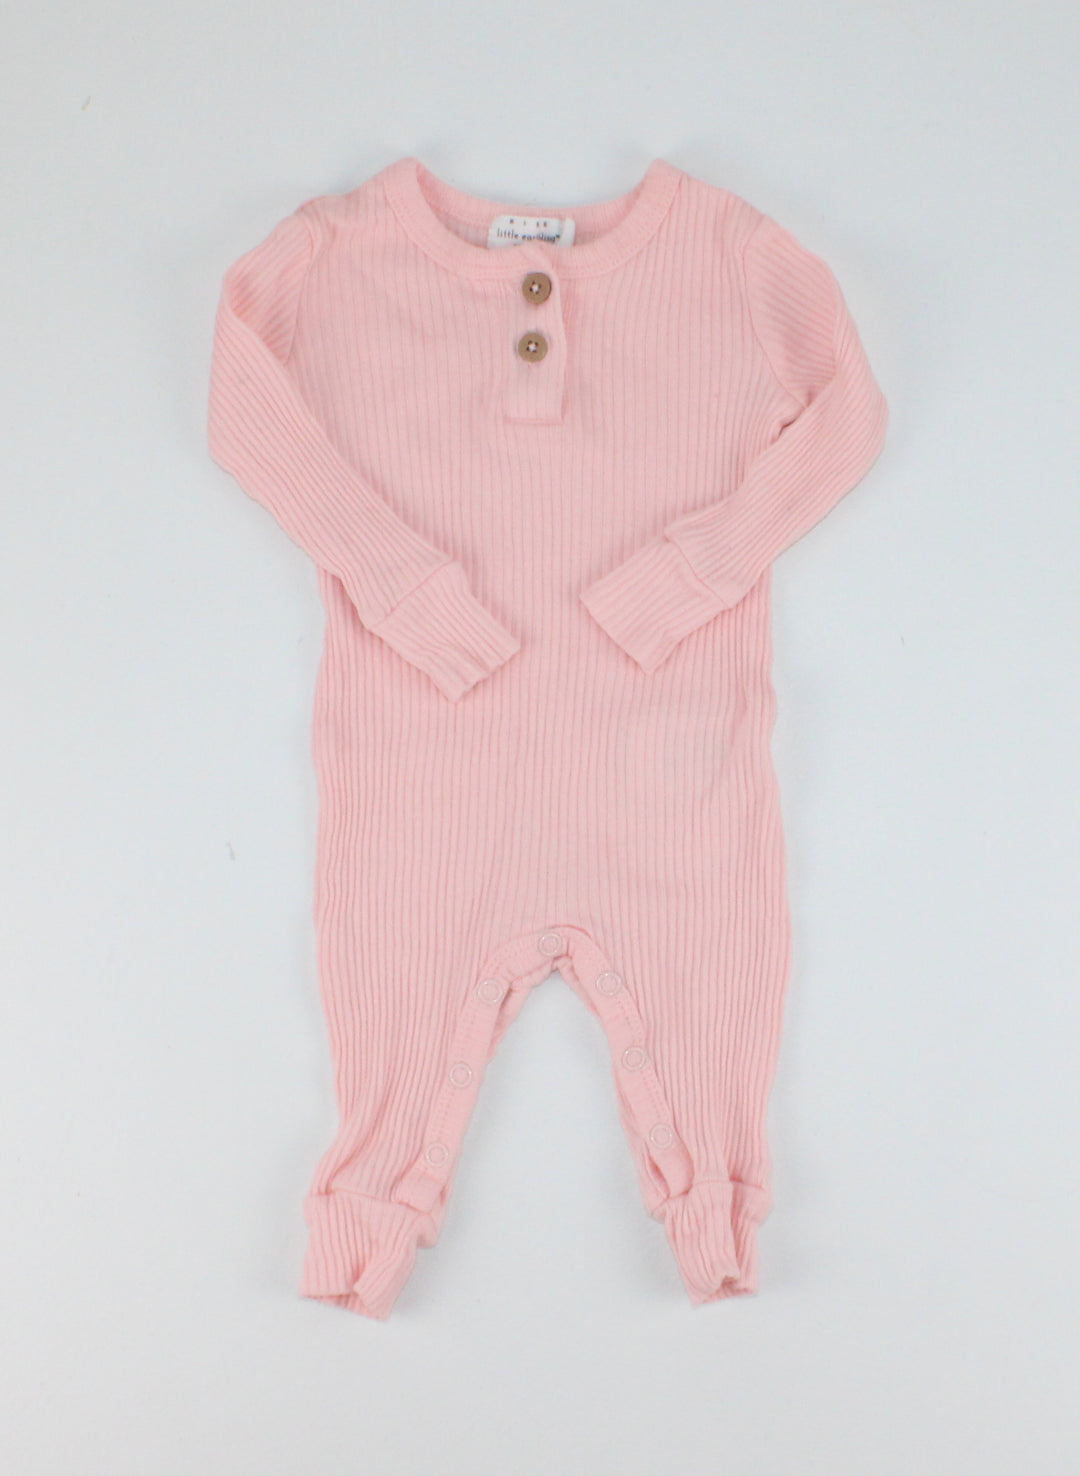 RISE LITTLE EARTHLING ORGANIC COTTON PINK ONE PIECE 3-6M EUC